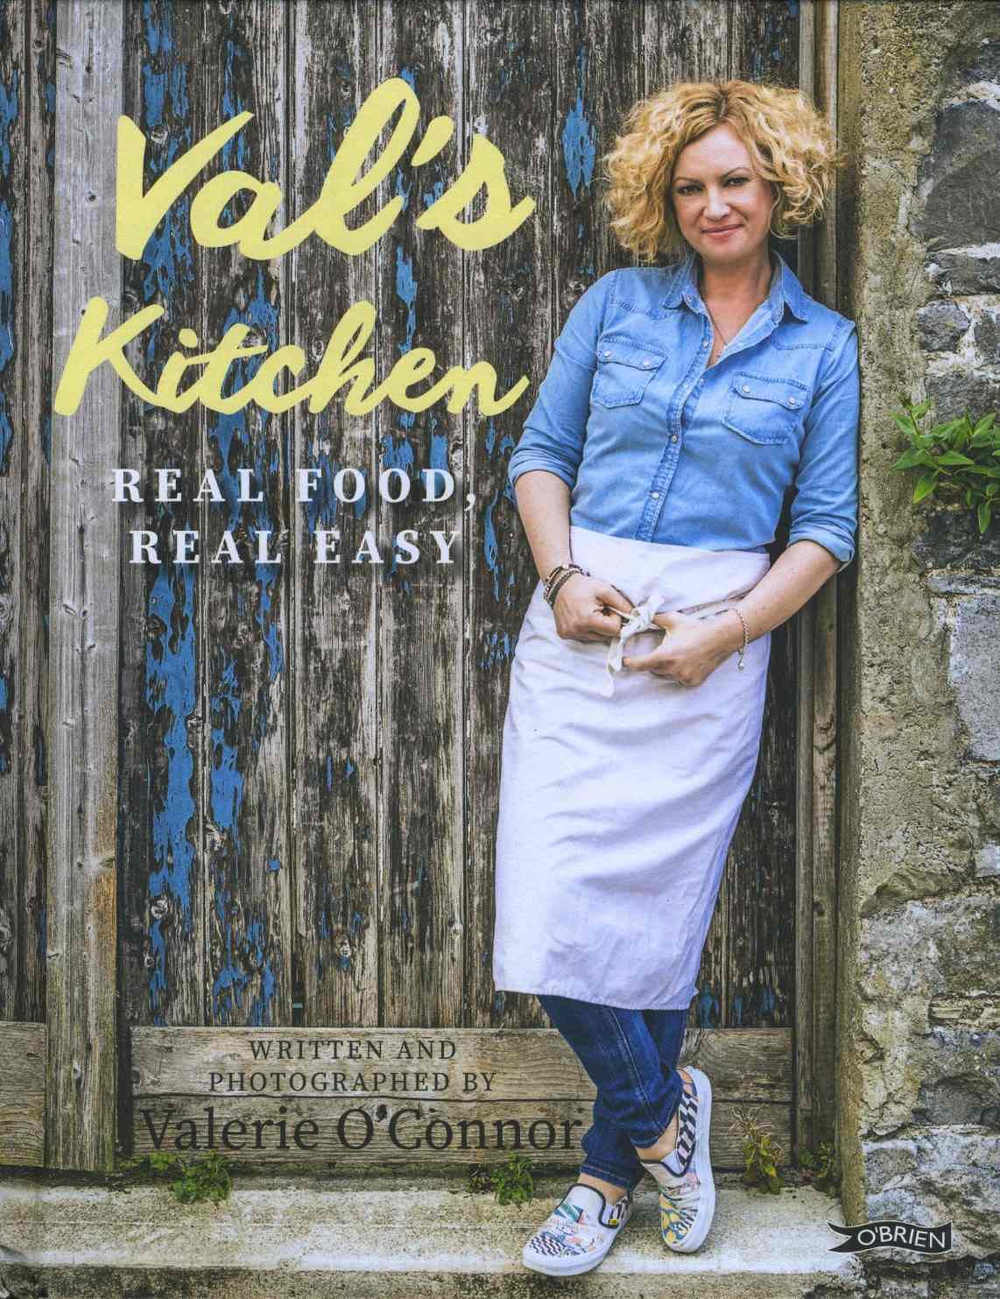 Val's Kitchen Real Food, Real Easy by Valerie O'Connor (Brien Press; hardback, 246x189mm, 160pp; photography by the author; €19.99/£14.99)